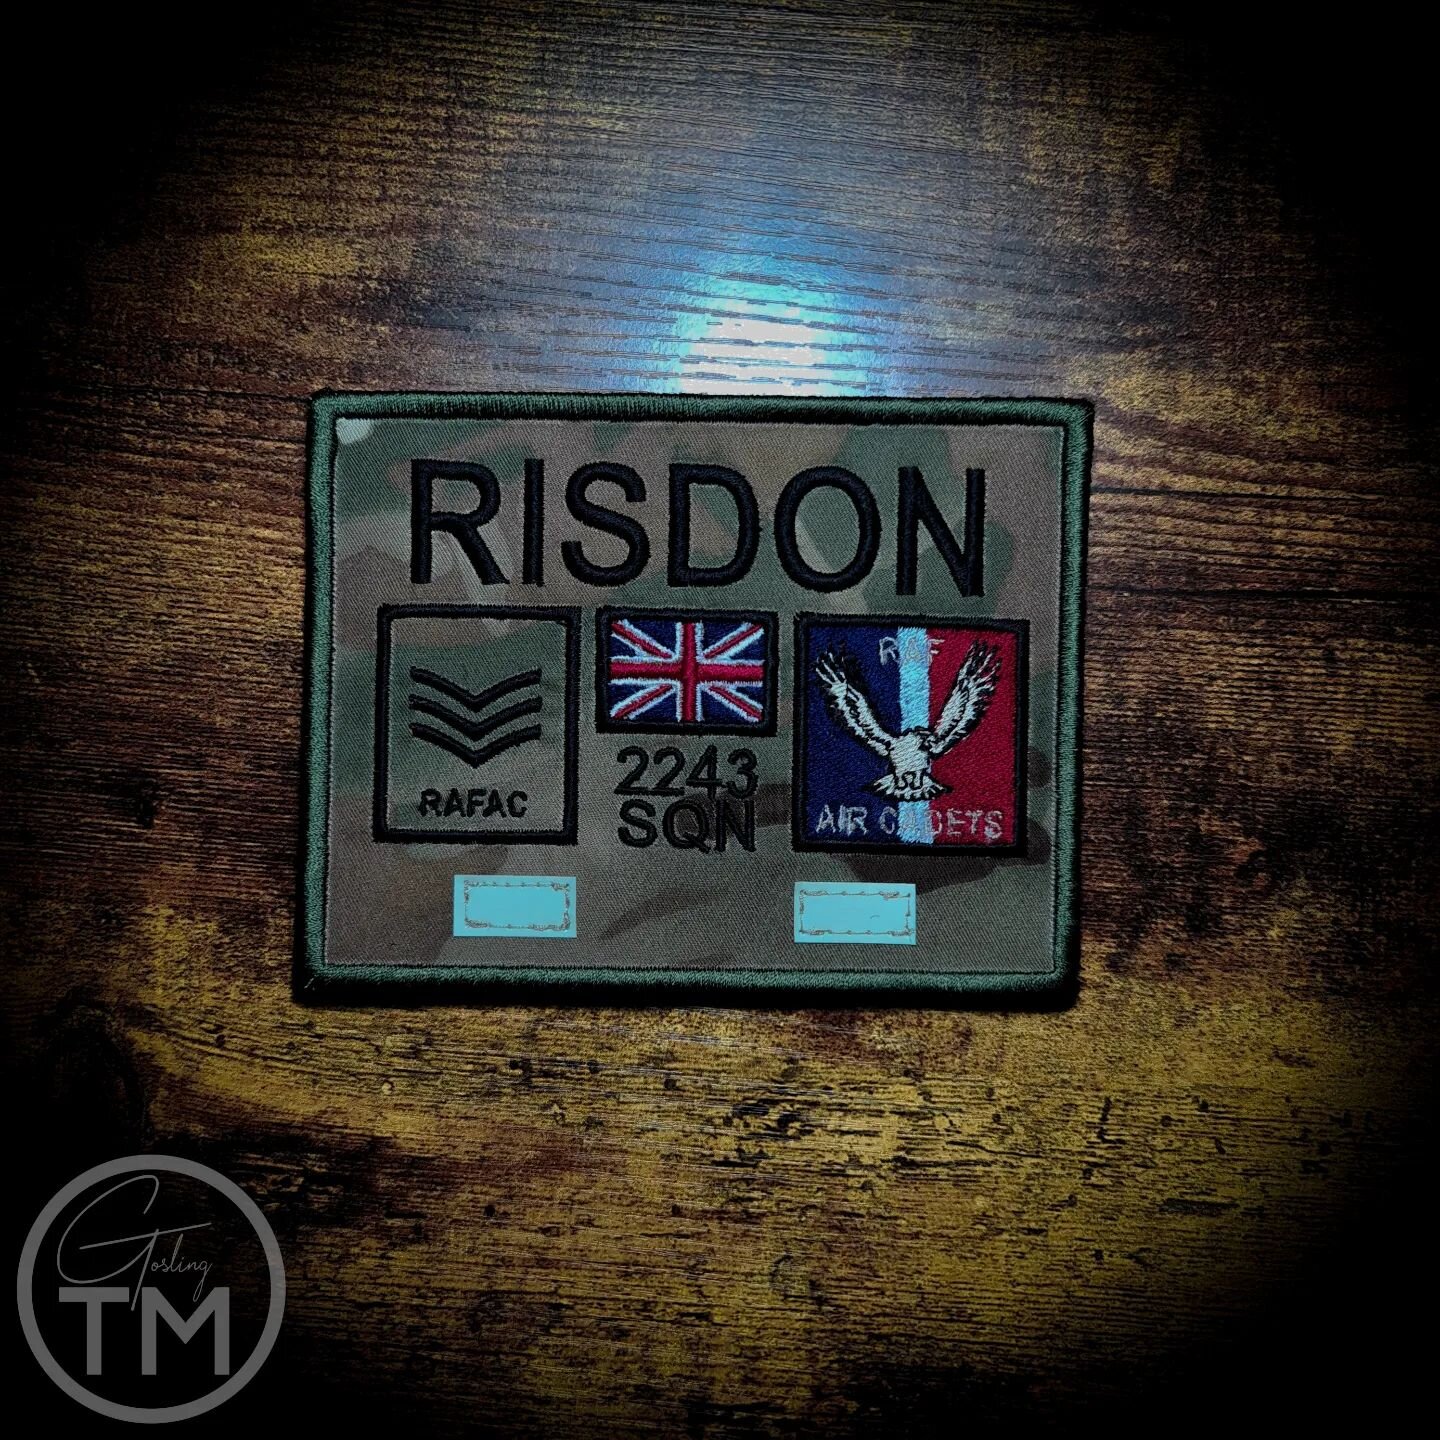 RISDON

Check out this Sgt ZAP made for @2243basildonsquadronrafac .

We look forward to seeing it in use, delivering training to the Cadets of Essex!

#GoslingTM #Tactical #Merchandise #Military #Custom #Smallbusiness #GBbusiness #ZAP #RAFAC #ACF #S